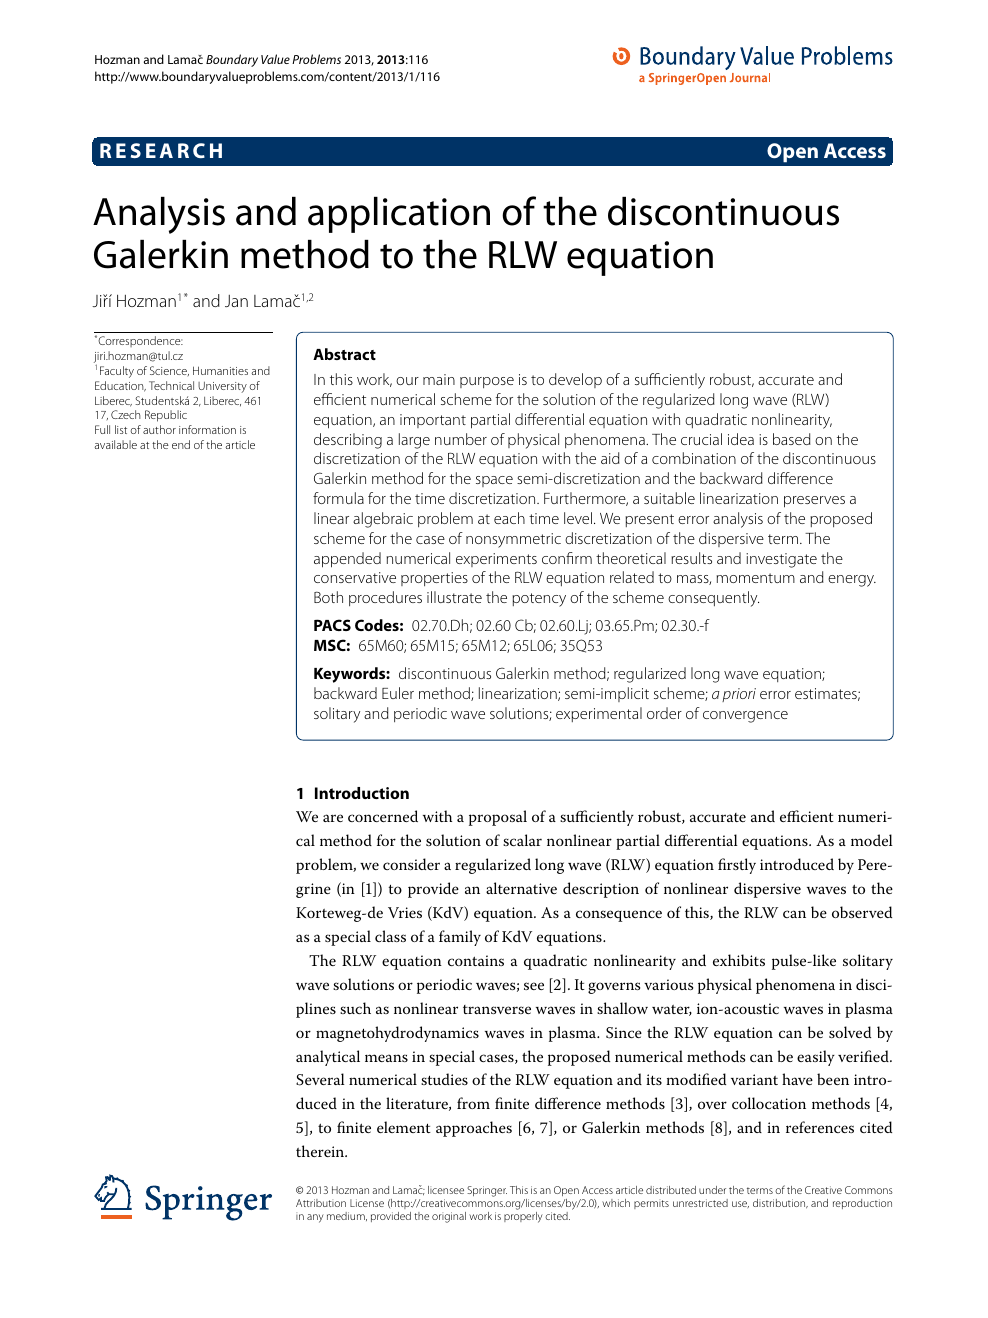 Analysis and application of the discontinuous Galerkin method to